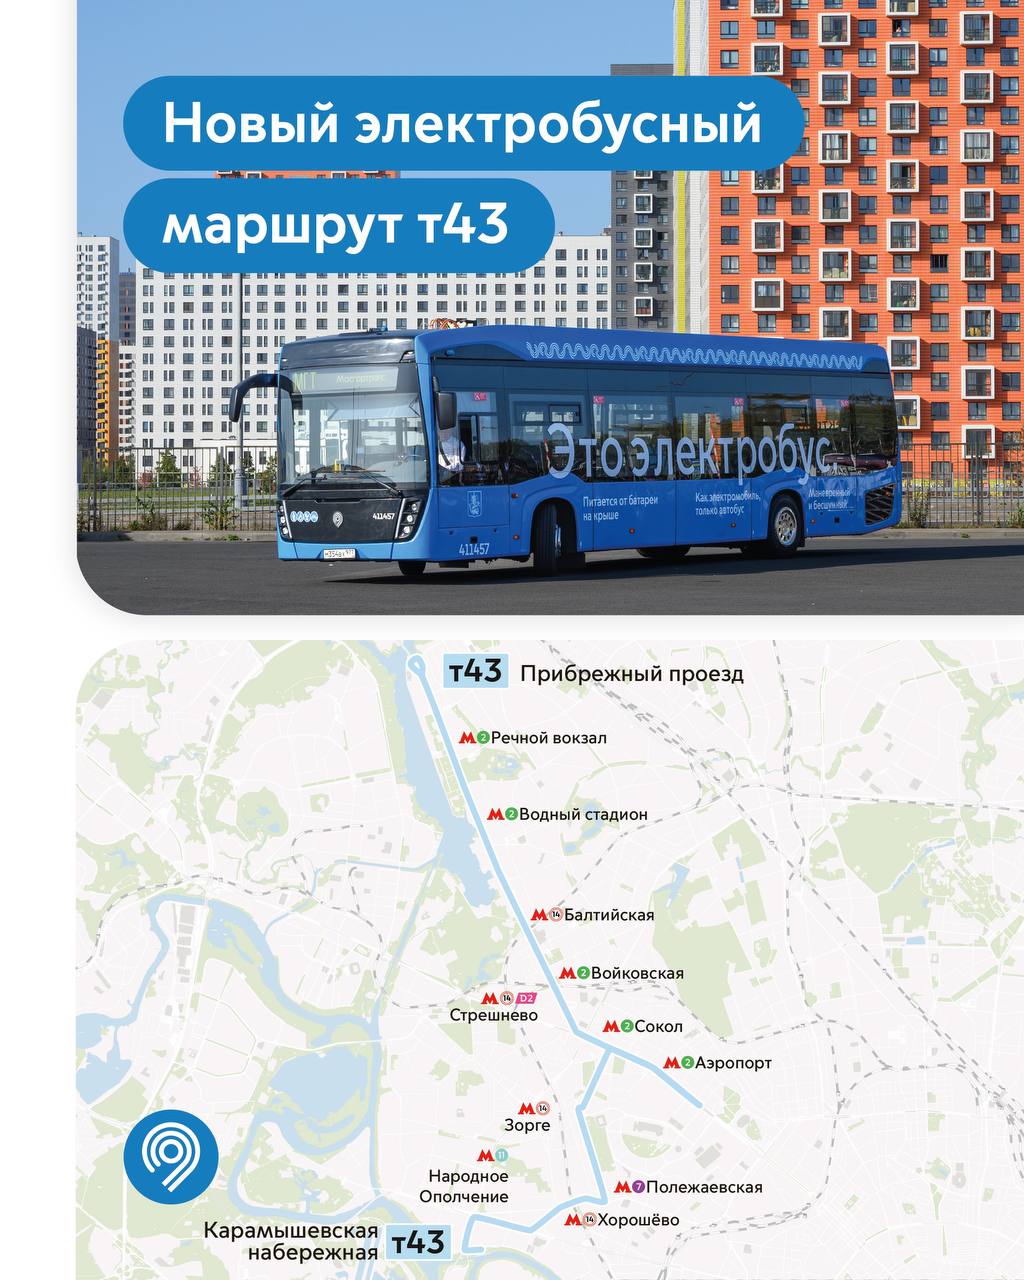 Moscow — Individual Route Maps; Moscow — Maps of Autonomous Electric Bus Lines